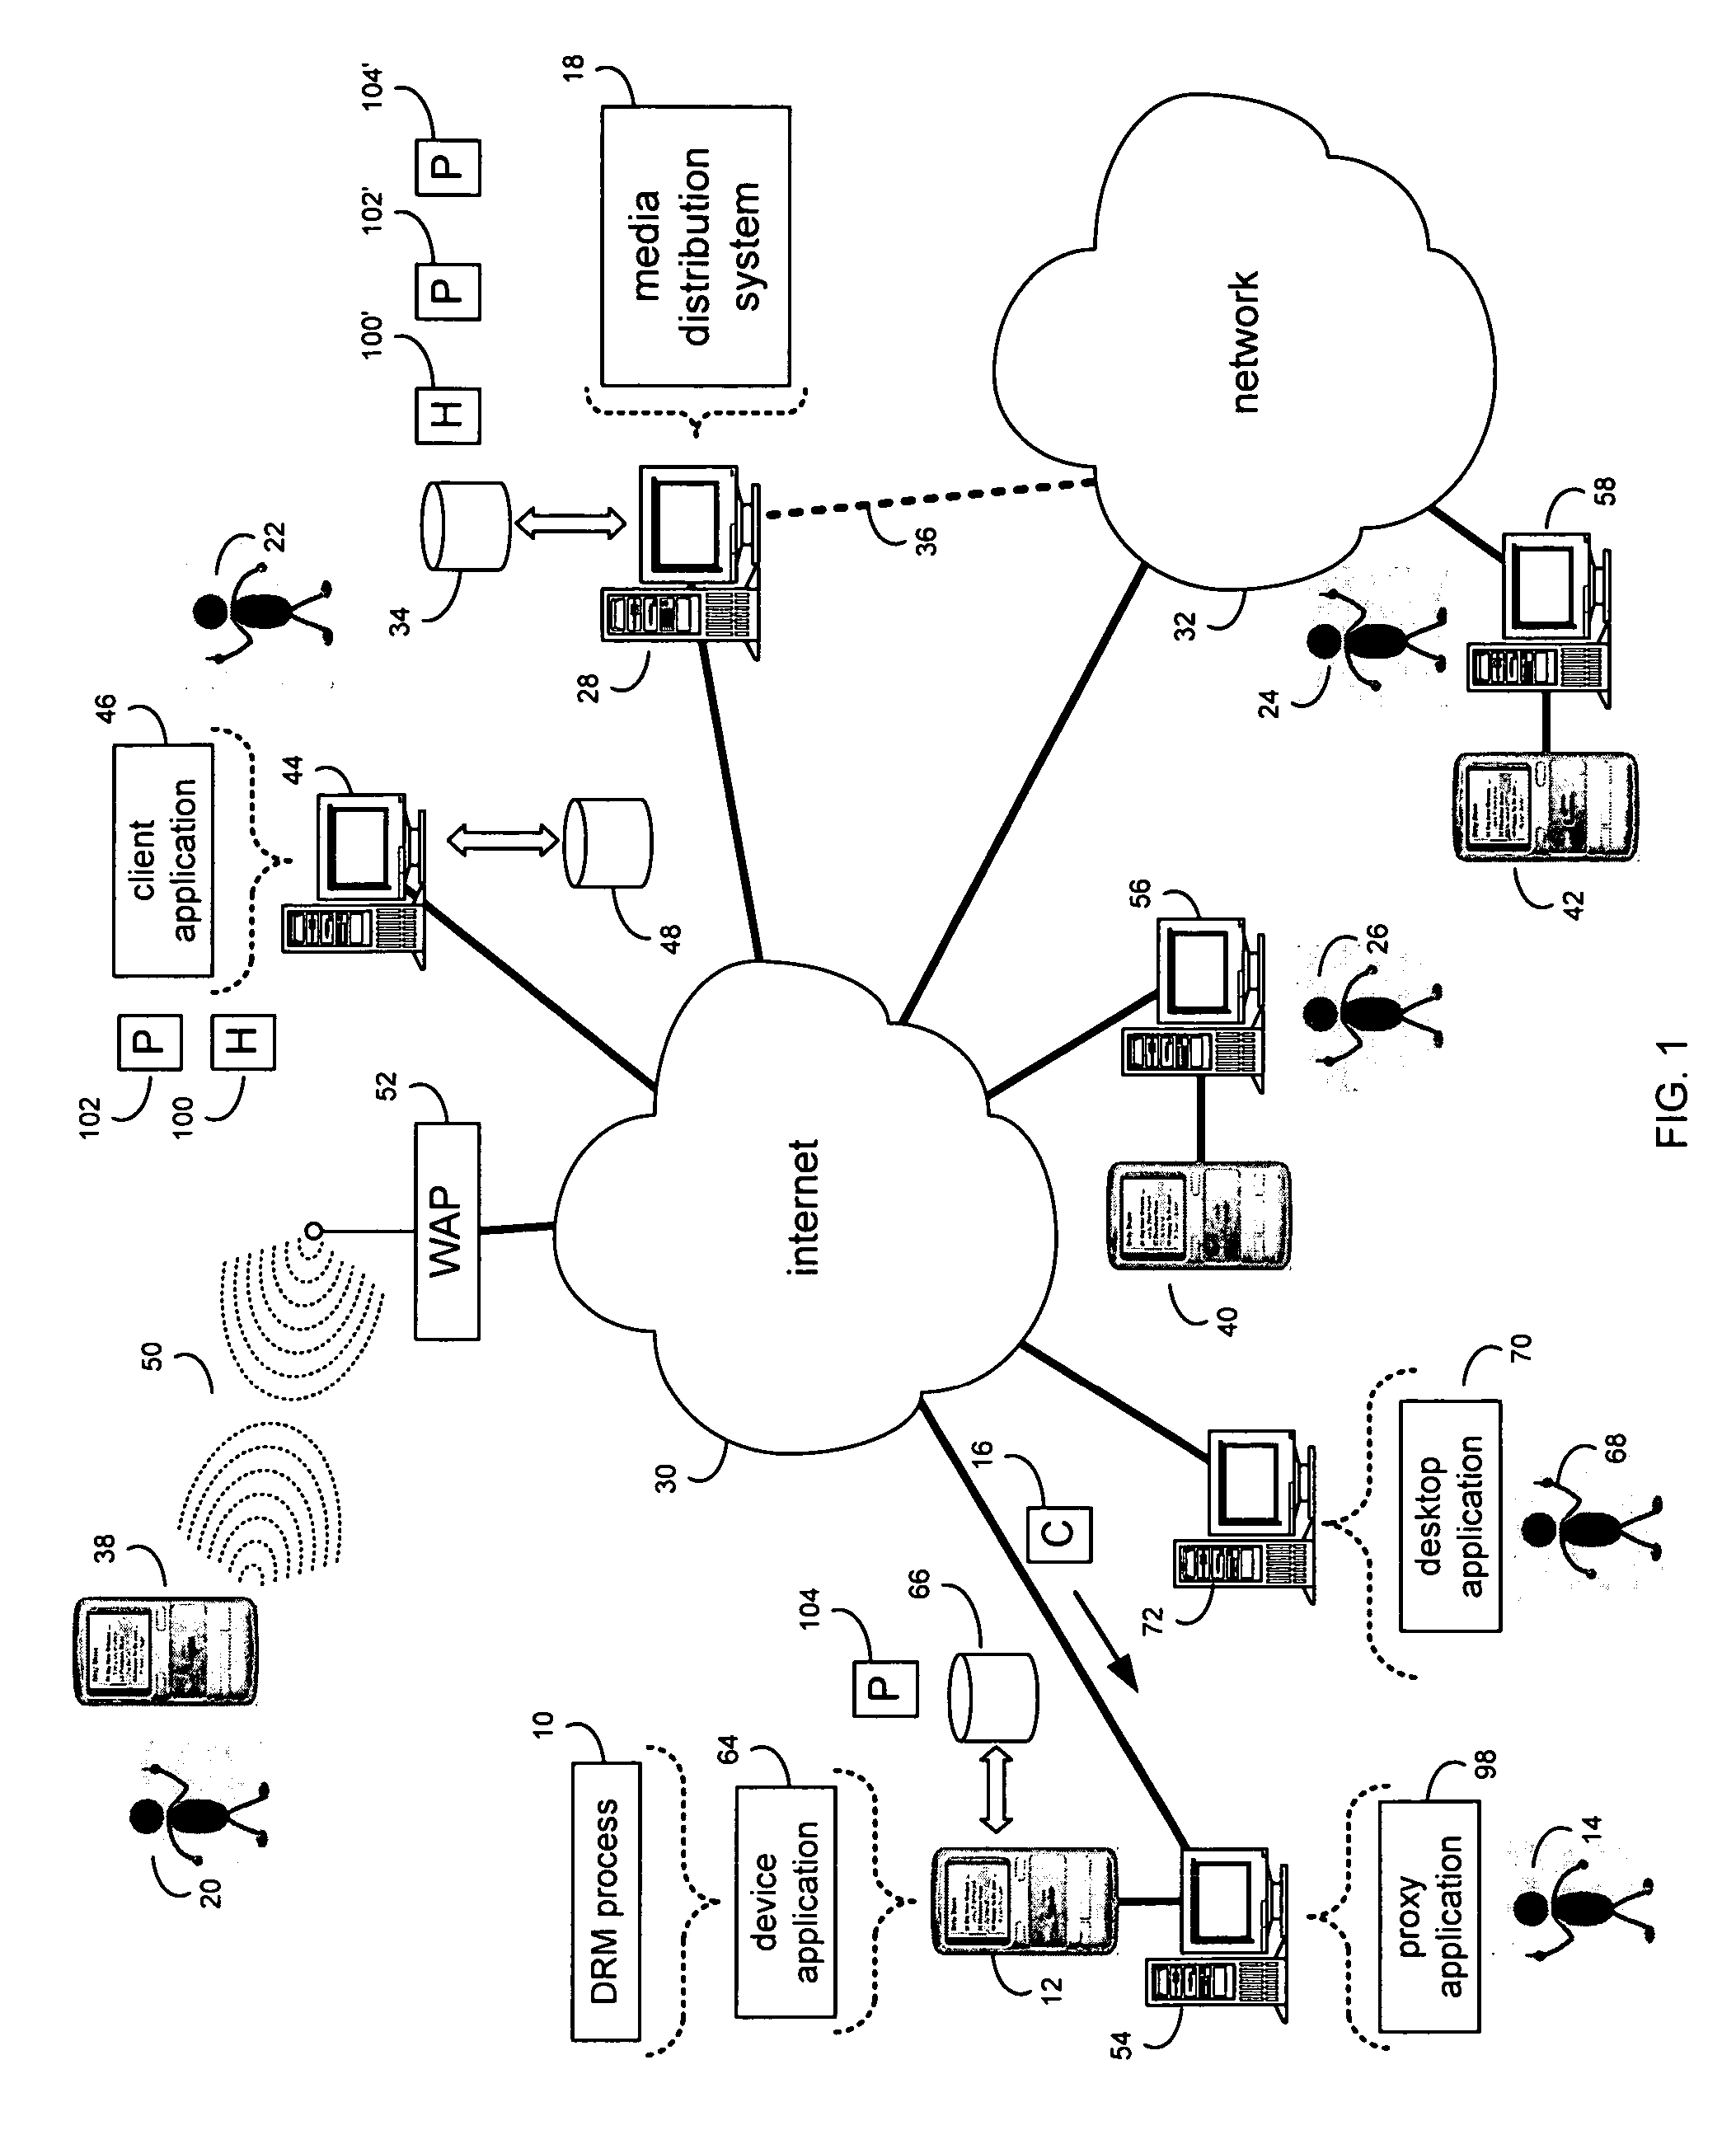 System and method for automatically managing media content